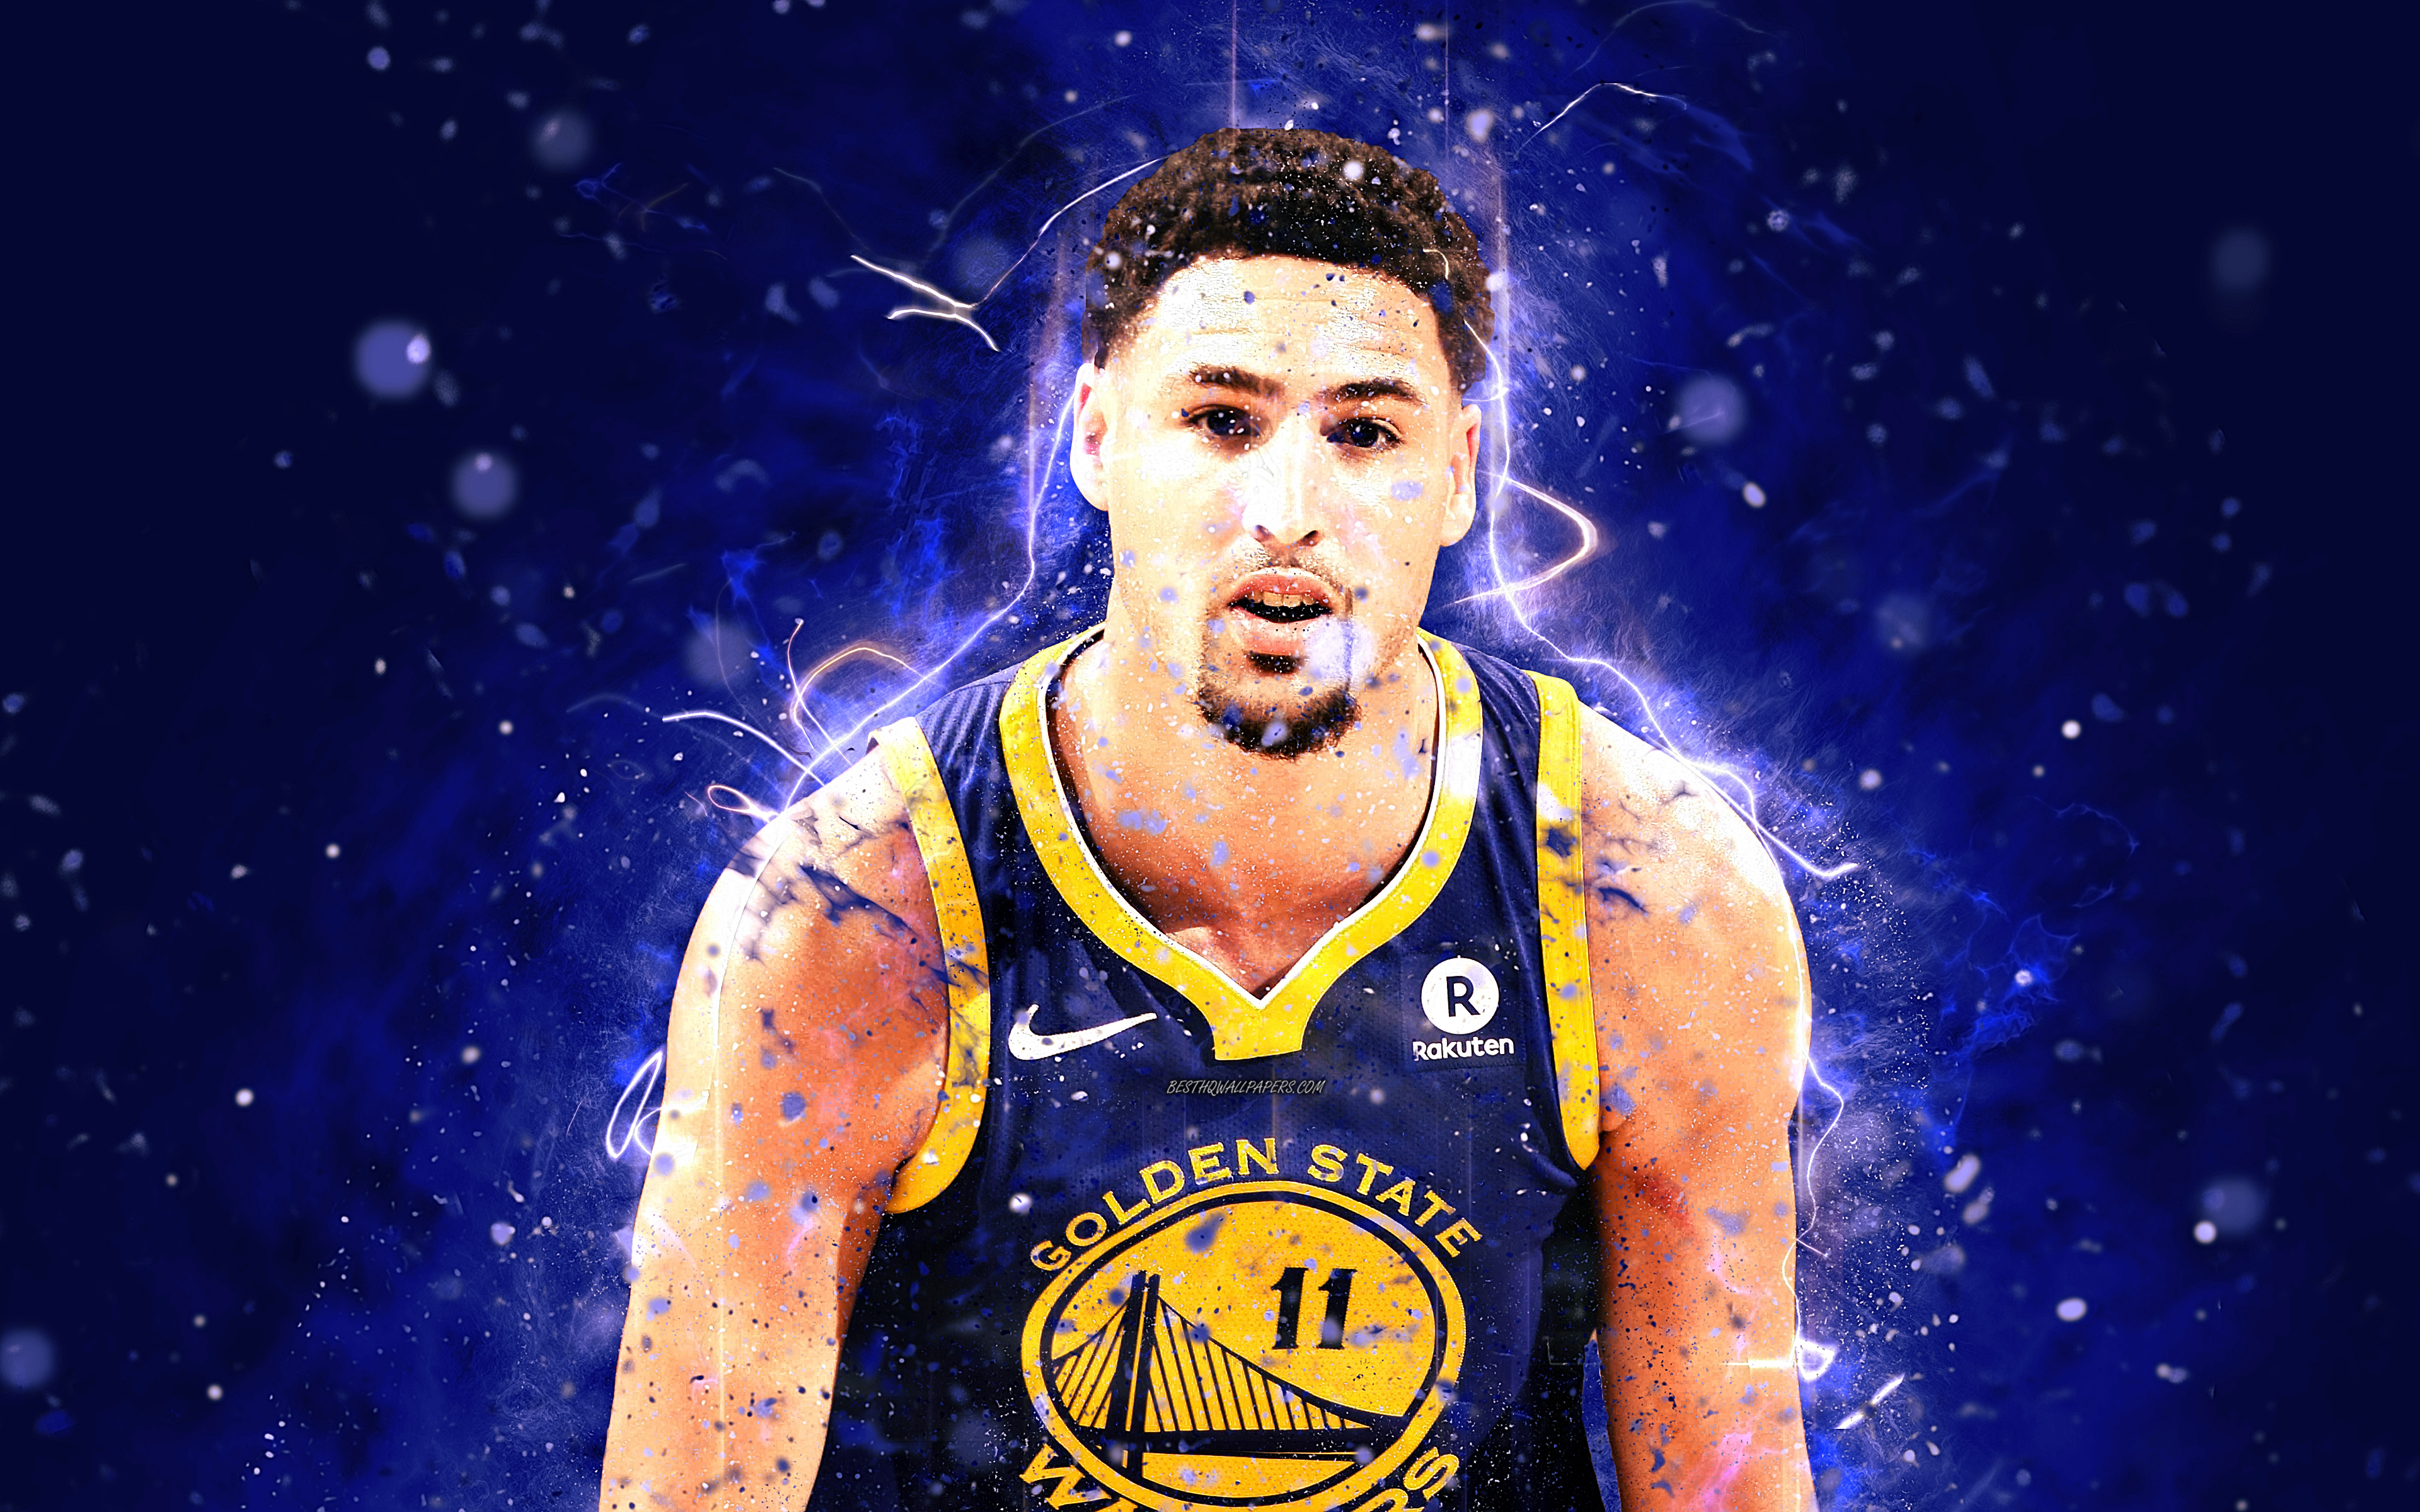 Download wallpaper 4k, Klay Thompson, abstract art, basketball stars, NBA, Golden State Warriors, Thompson, basketball, creative for desktop with resolution 3840x2400. High Quality HD picture wallpaper